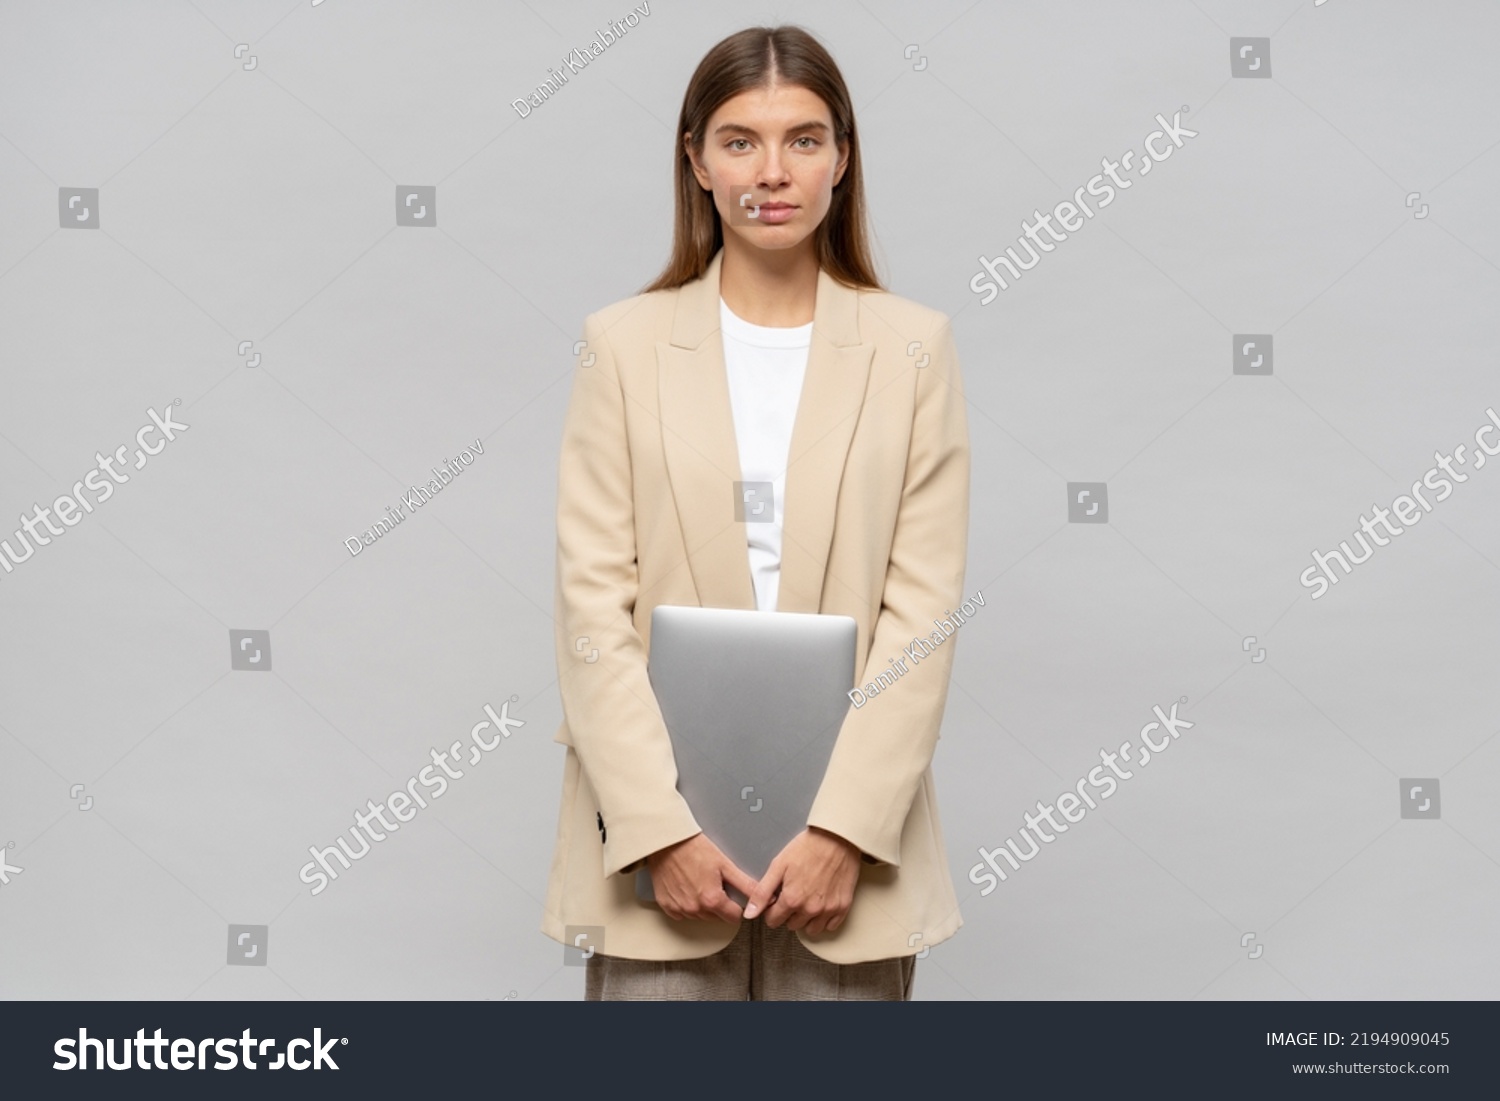 Shy female student feeling nervous waiting for results of exam standing on gray background with laptop in hands. Education and technology #2194909045